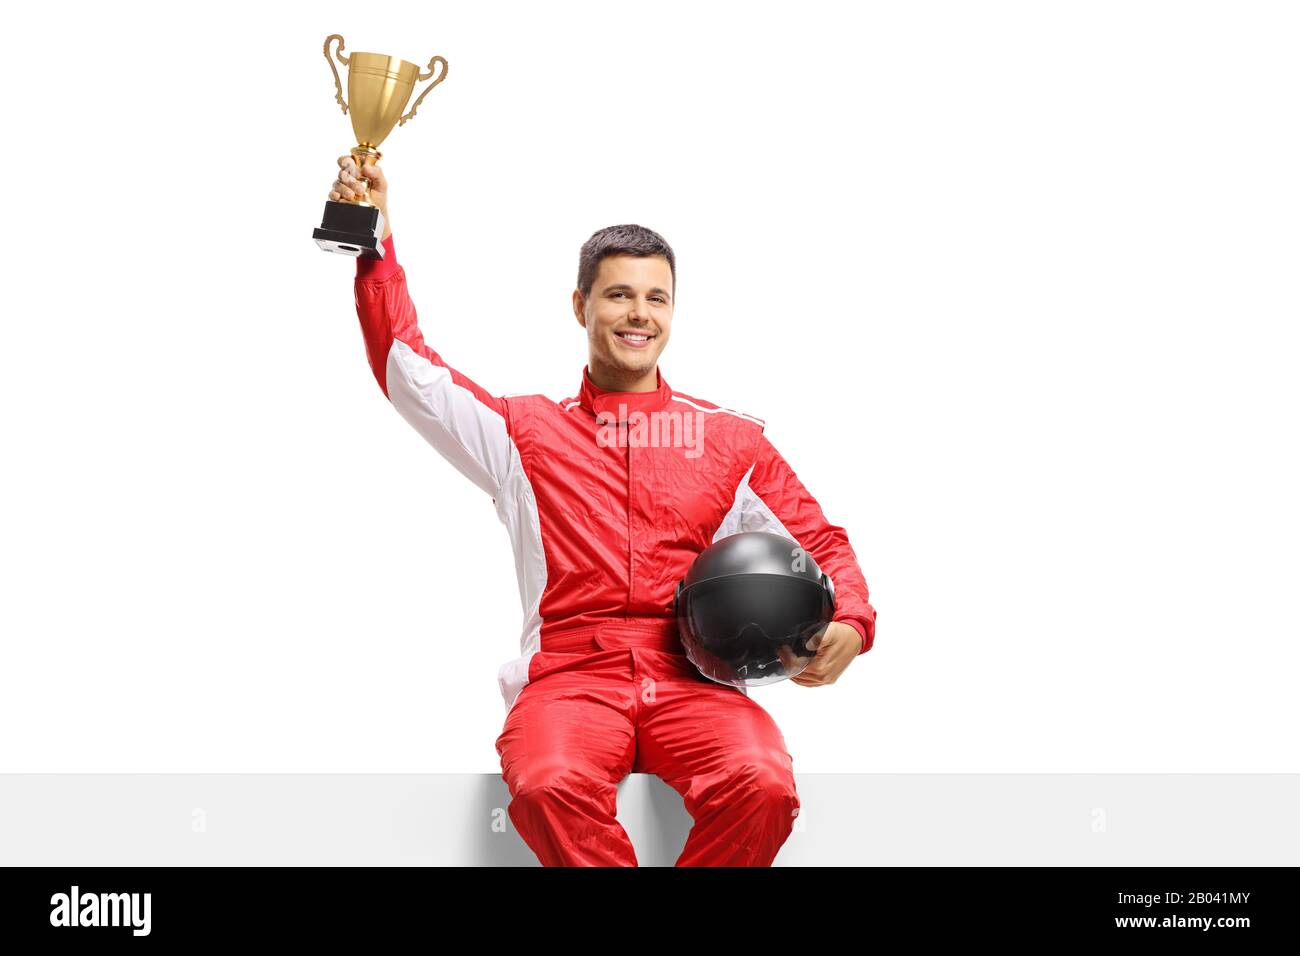 Racer in a suit holding a gold trophy cup and sitting on a panel isolated on white background Stock Photo